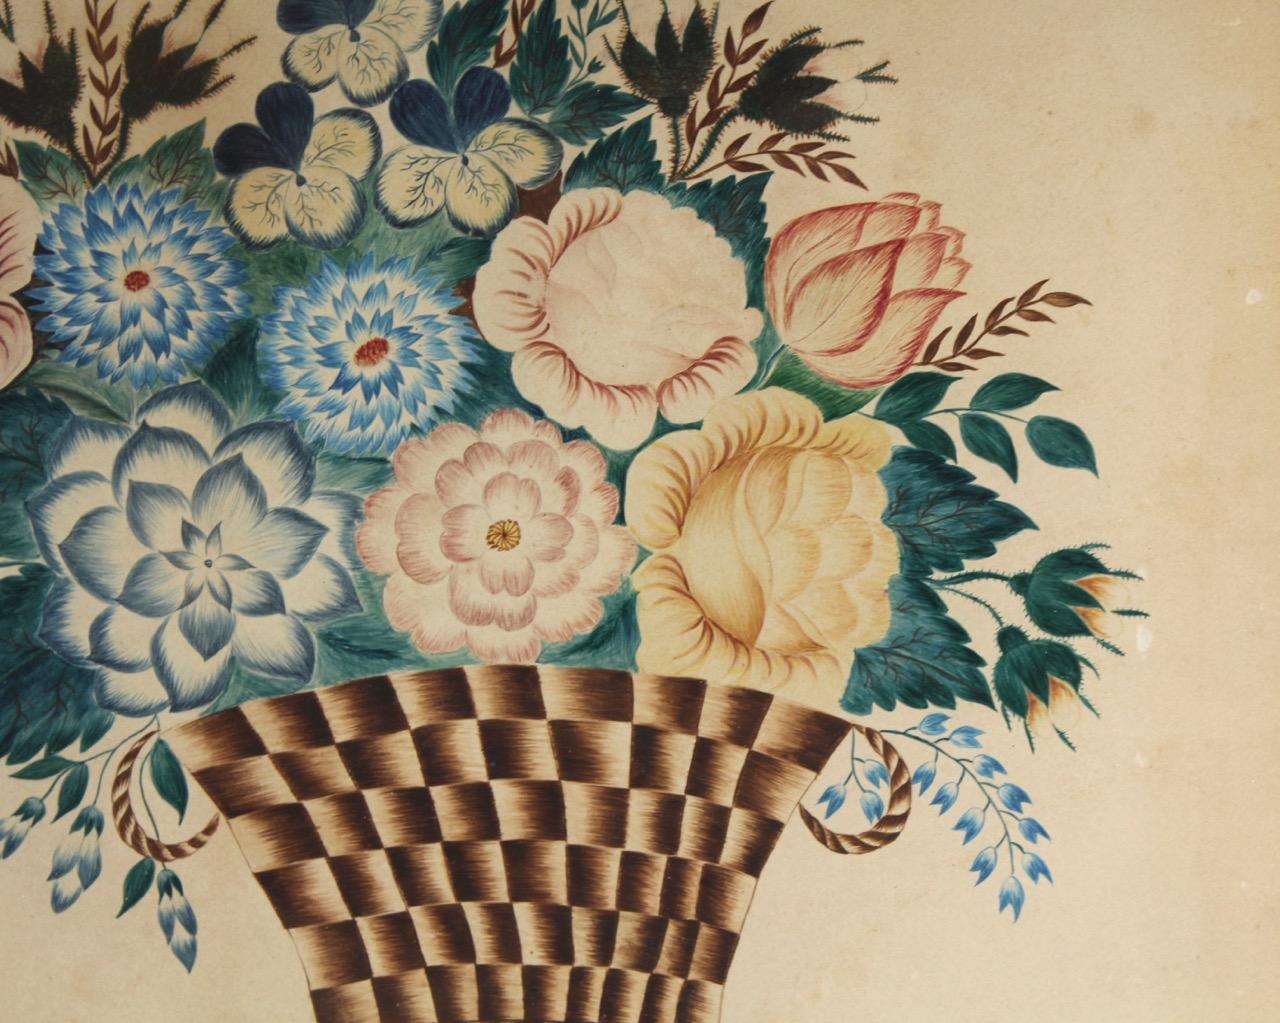 Antique American Folk Art Watercolor Theorem Drawing of a Basket with Flowers 4